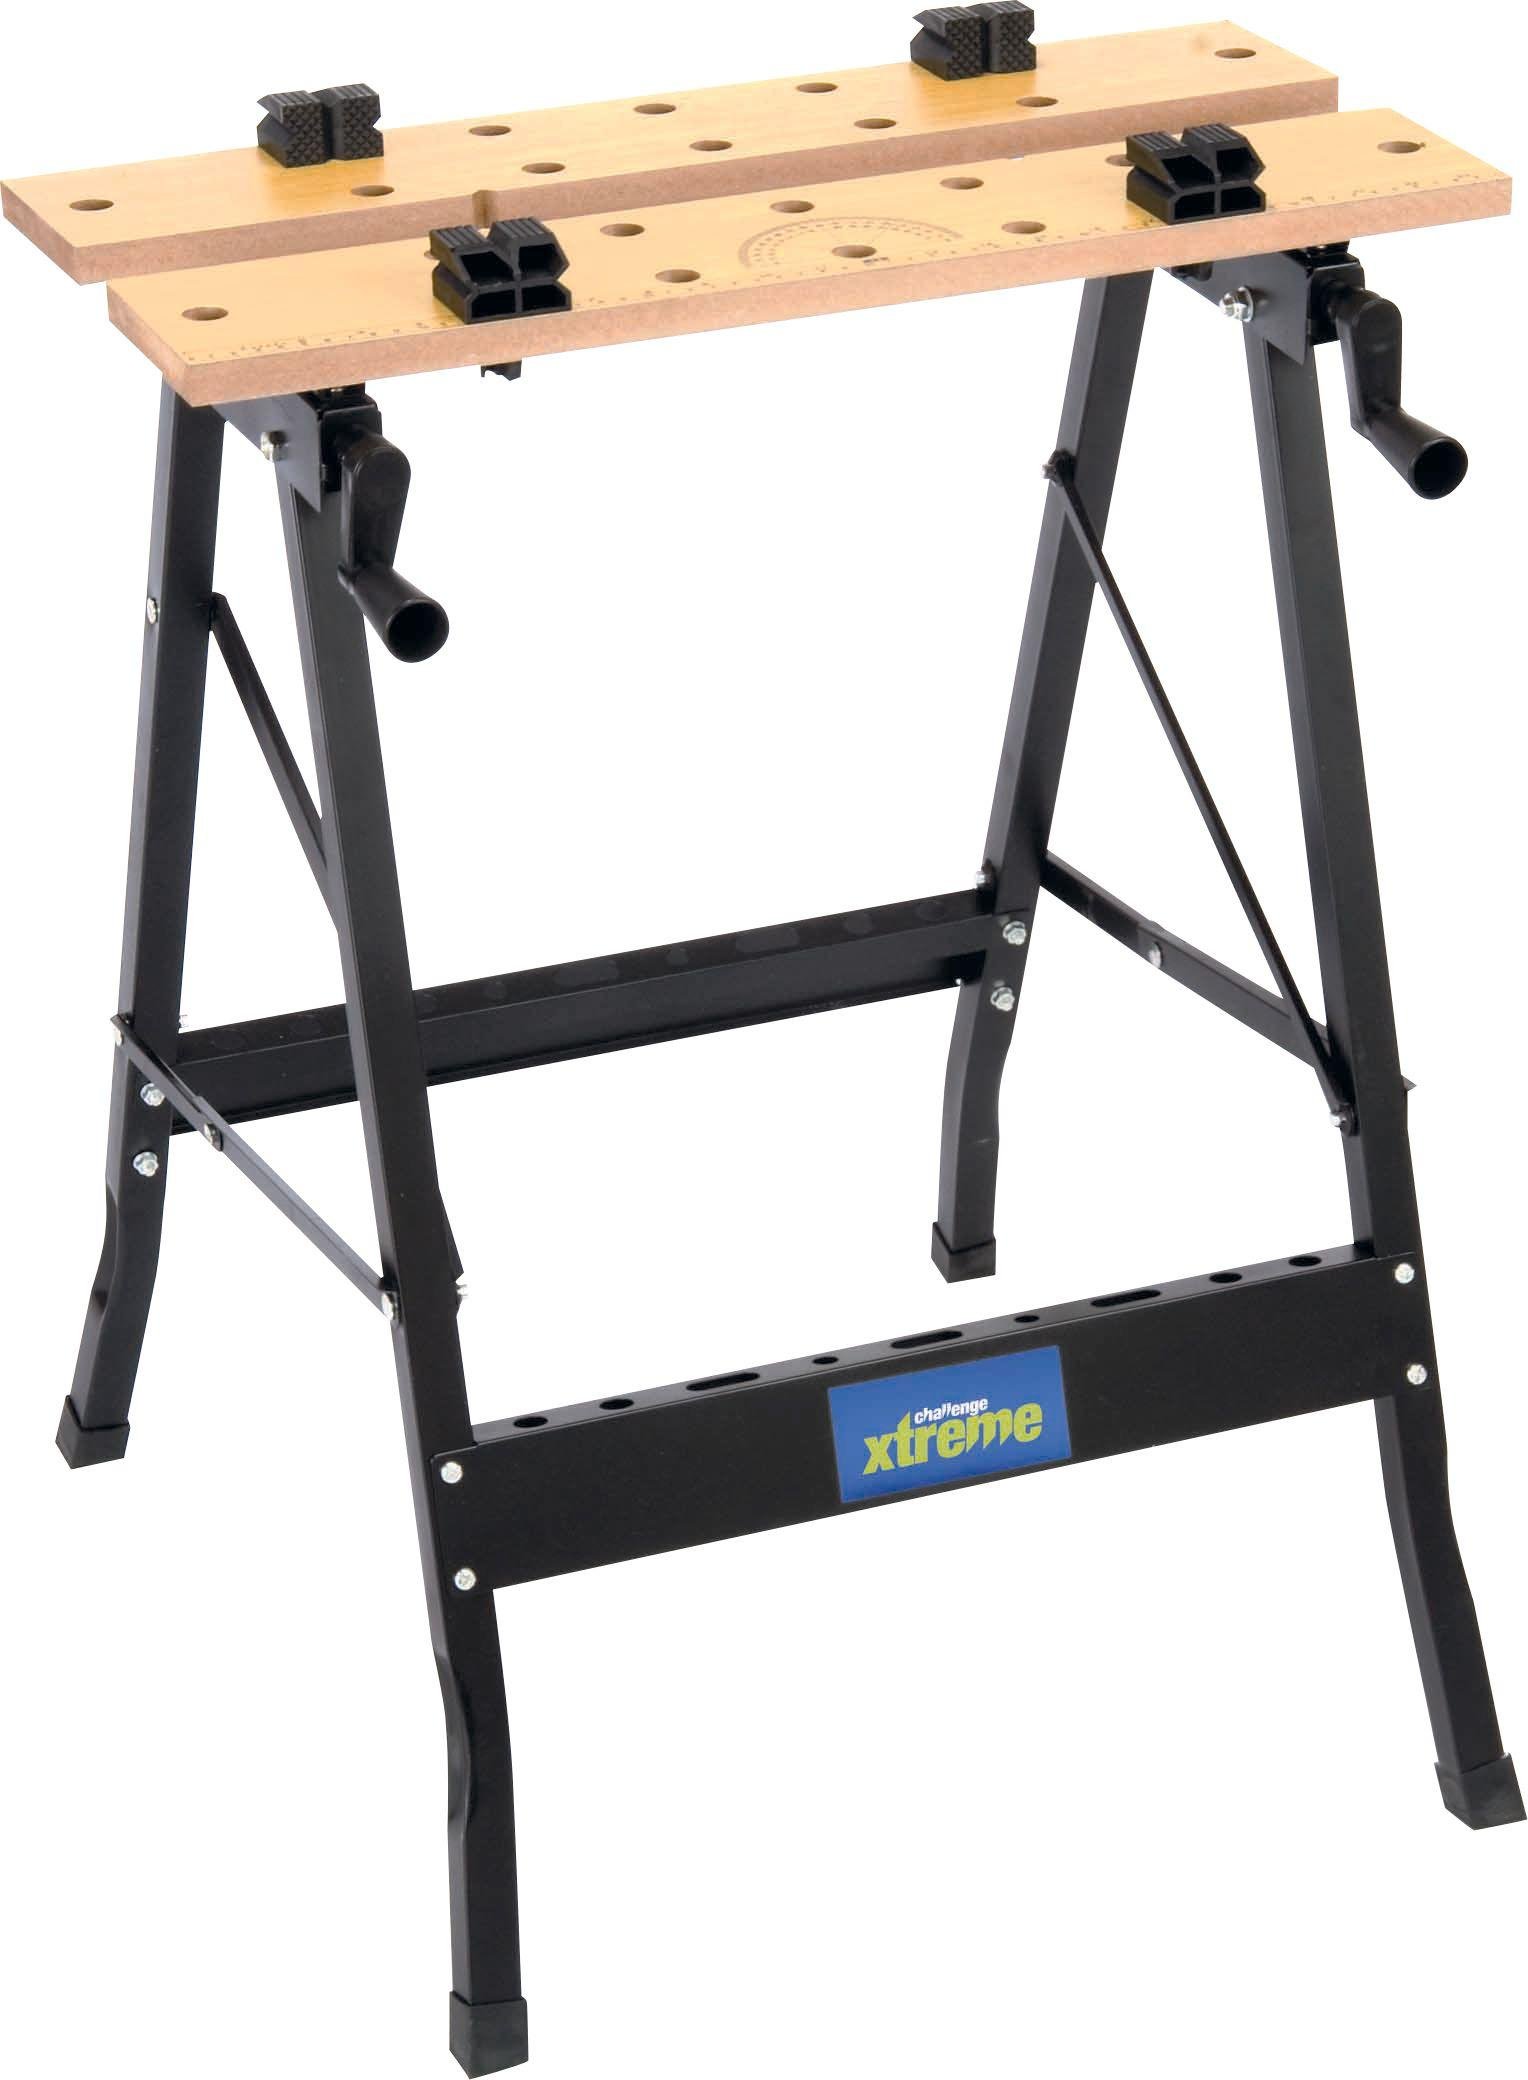 Challenge Xtreme Portable Folding Work Bench Review